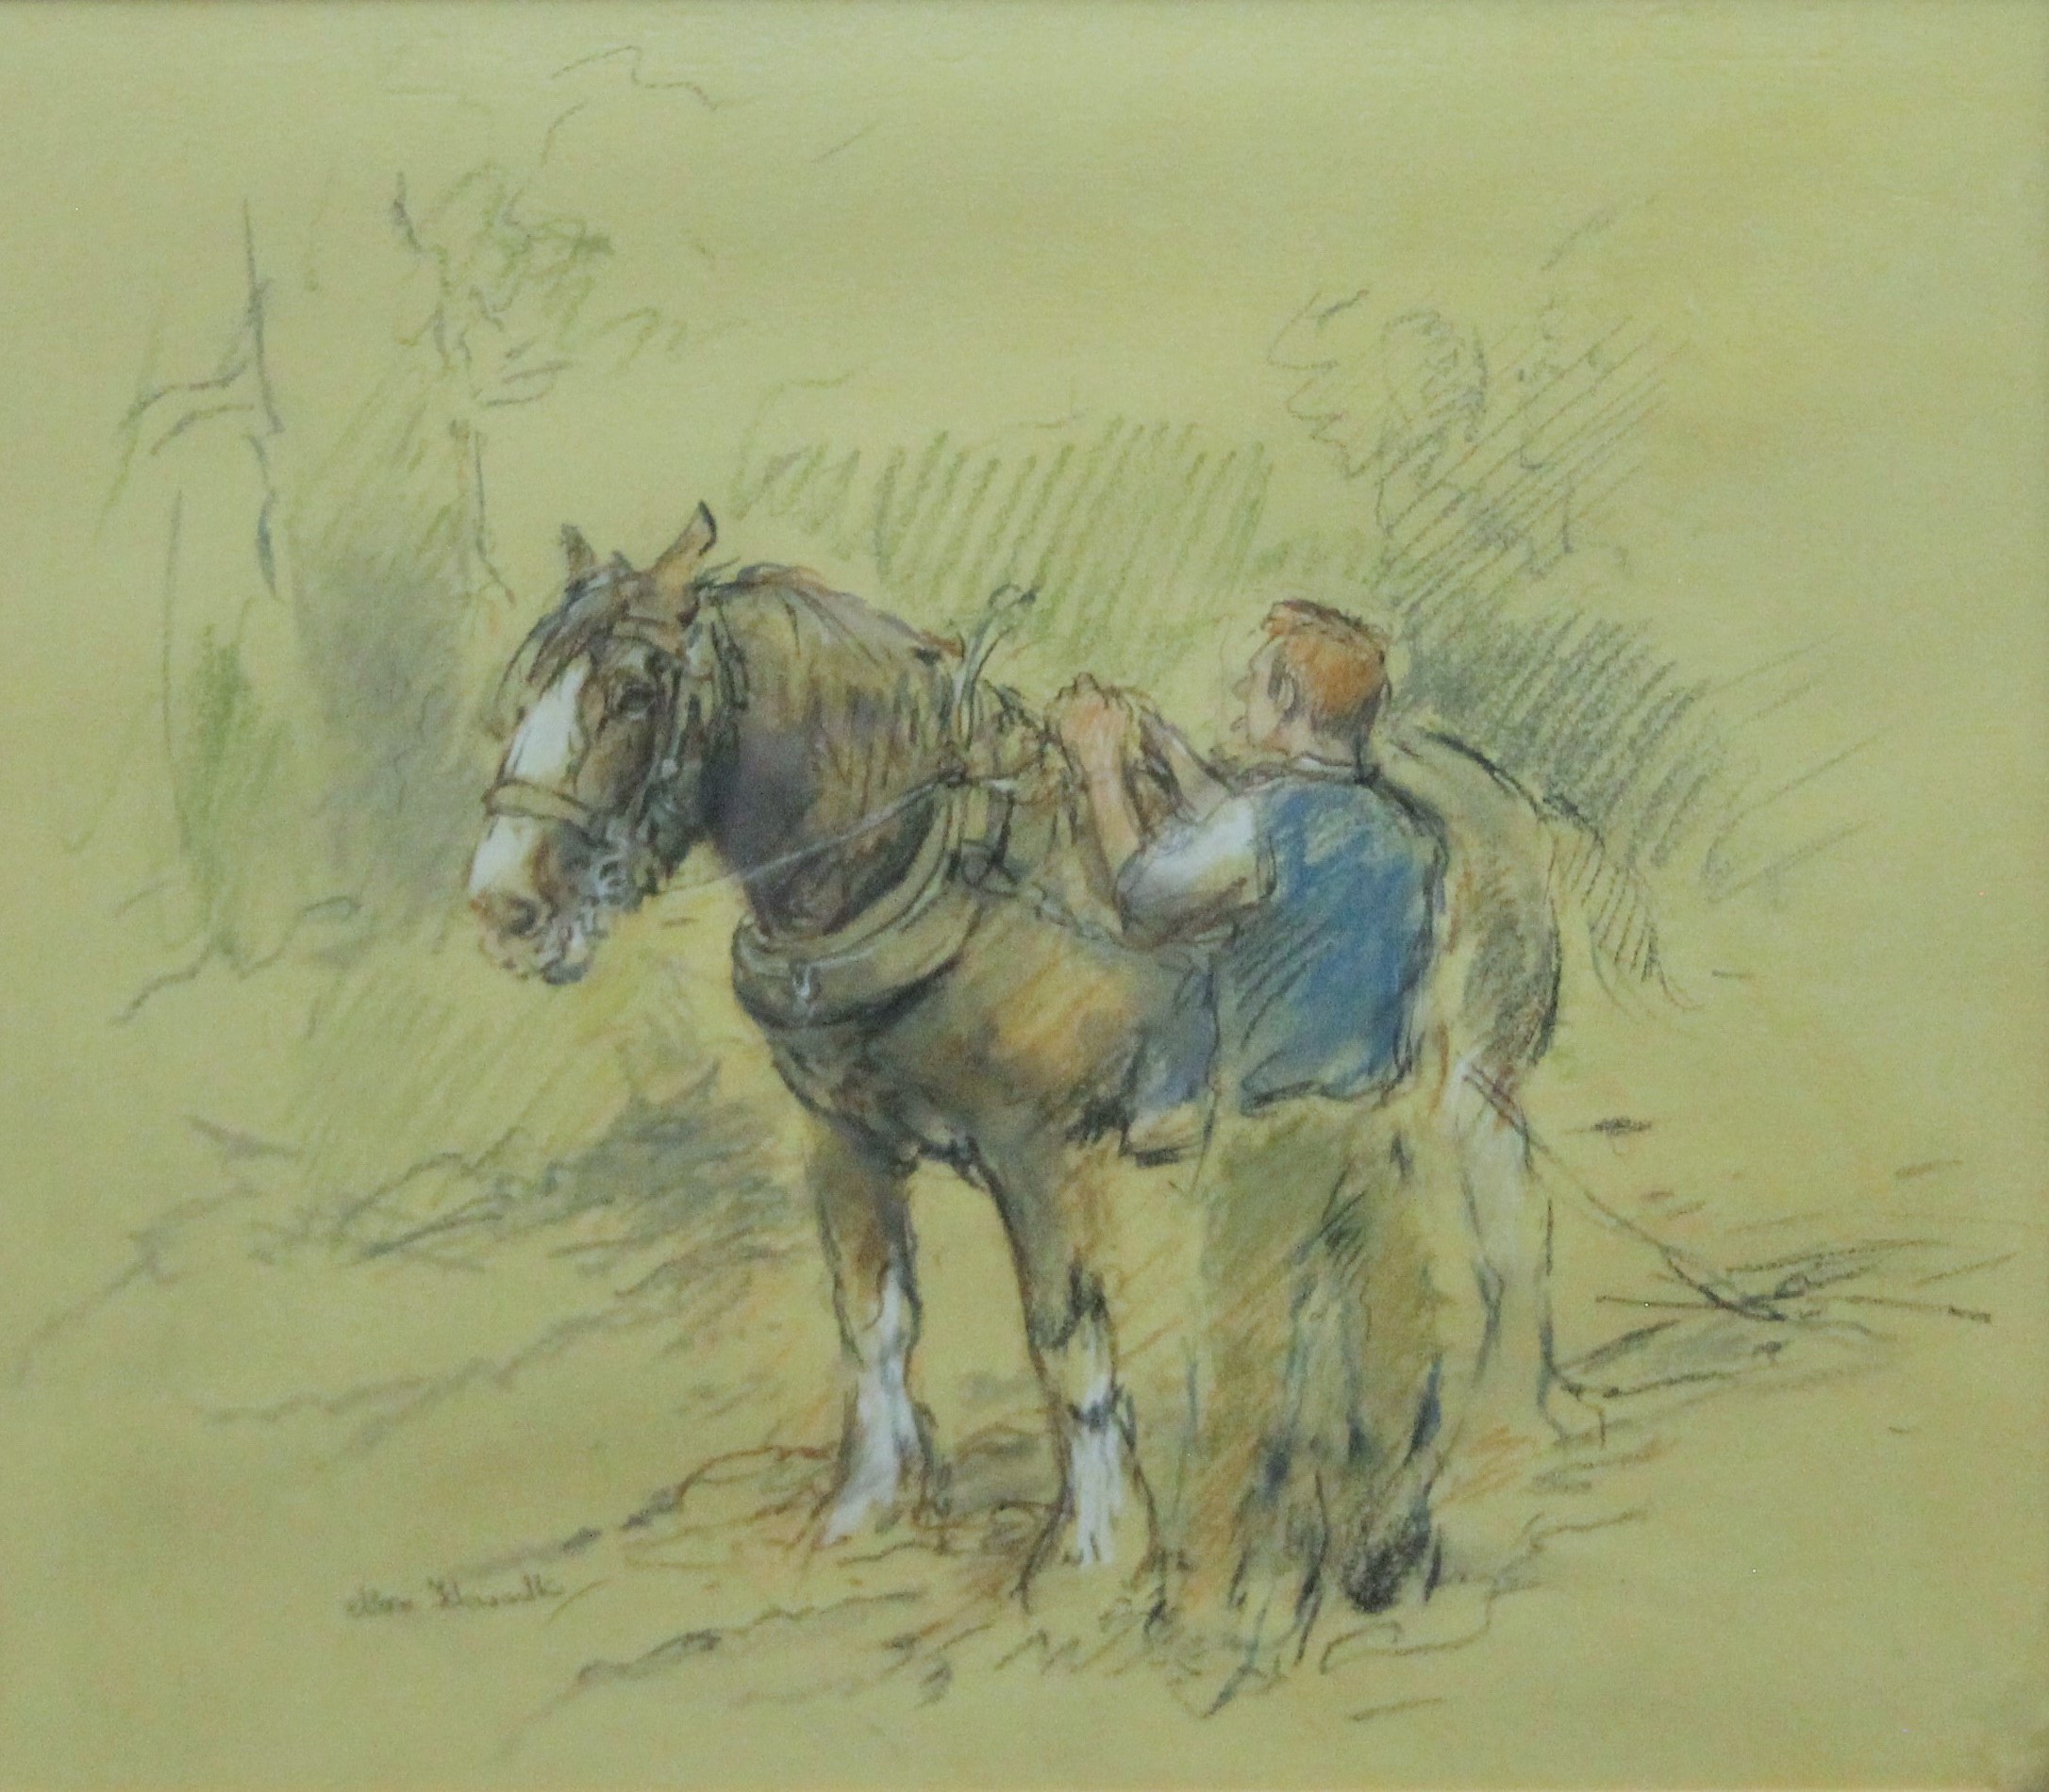 HOWARTH, NORA (20th century) British (AR), Man and Horse, pastel, signed, framed and glazed.